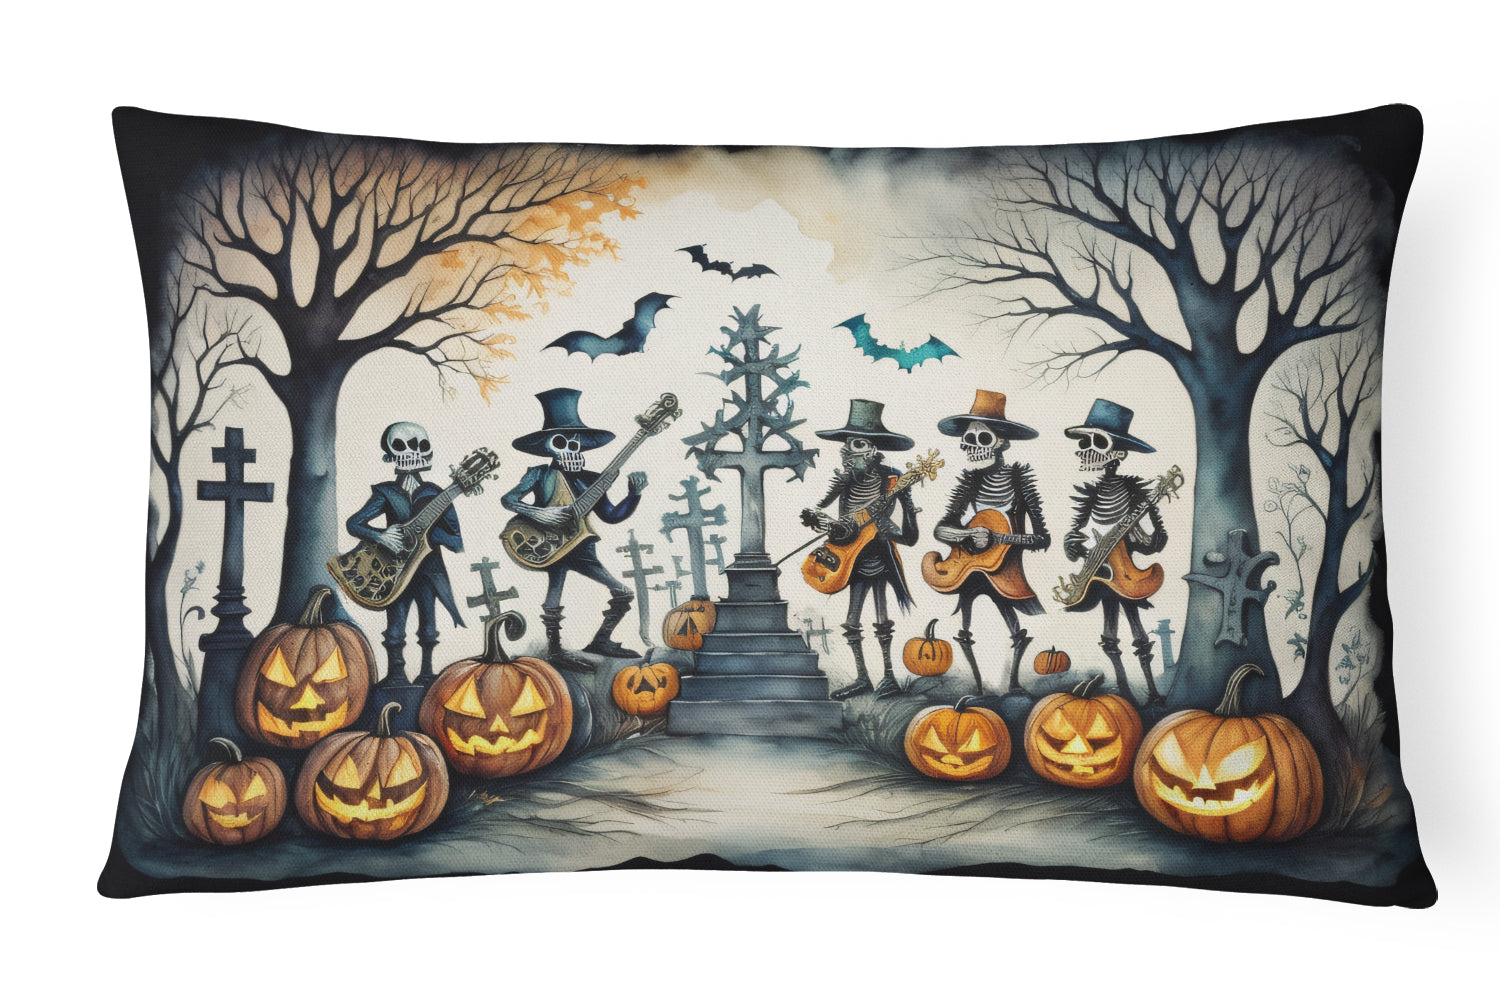 Buy this Mariachi Skeleton Band Spooky Halloween Fabric Decorative Pillow